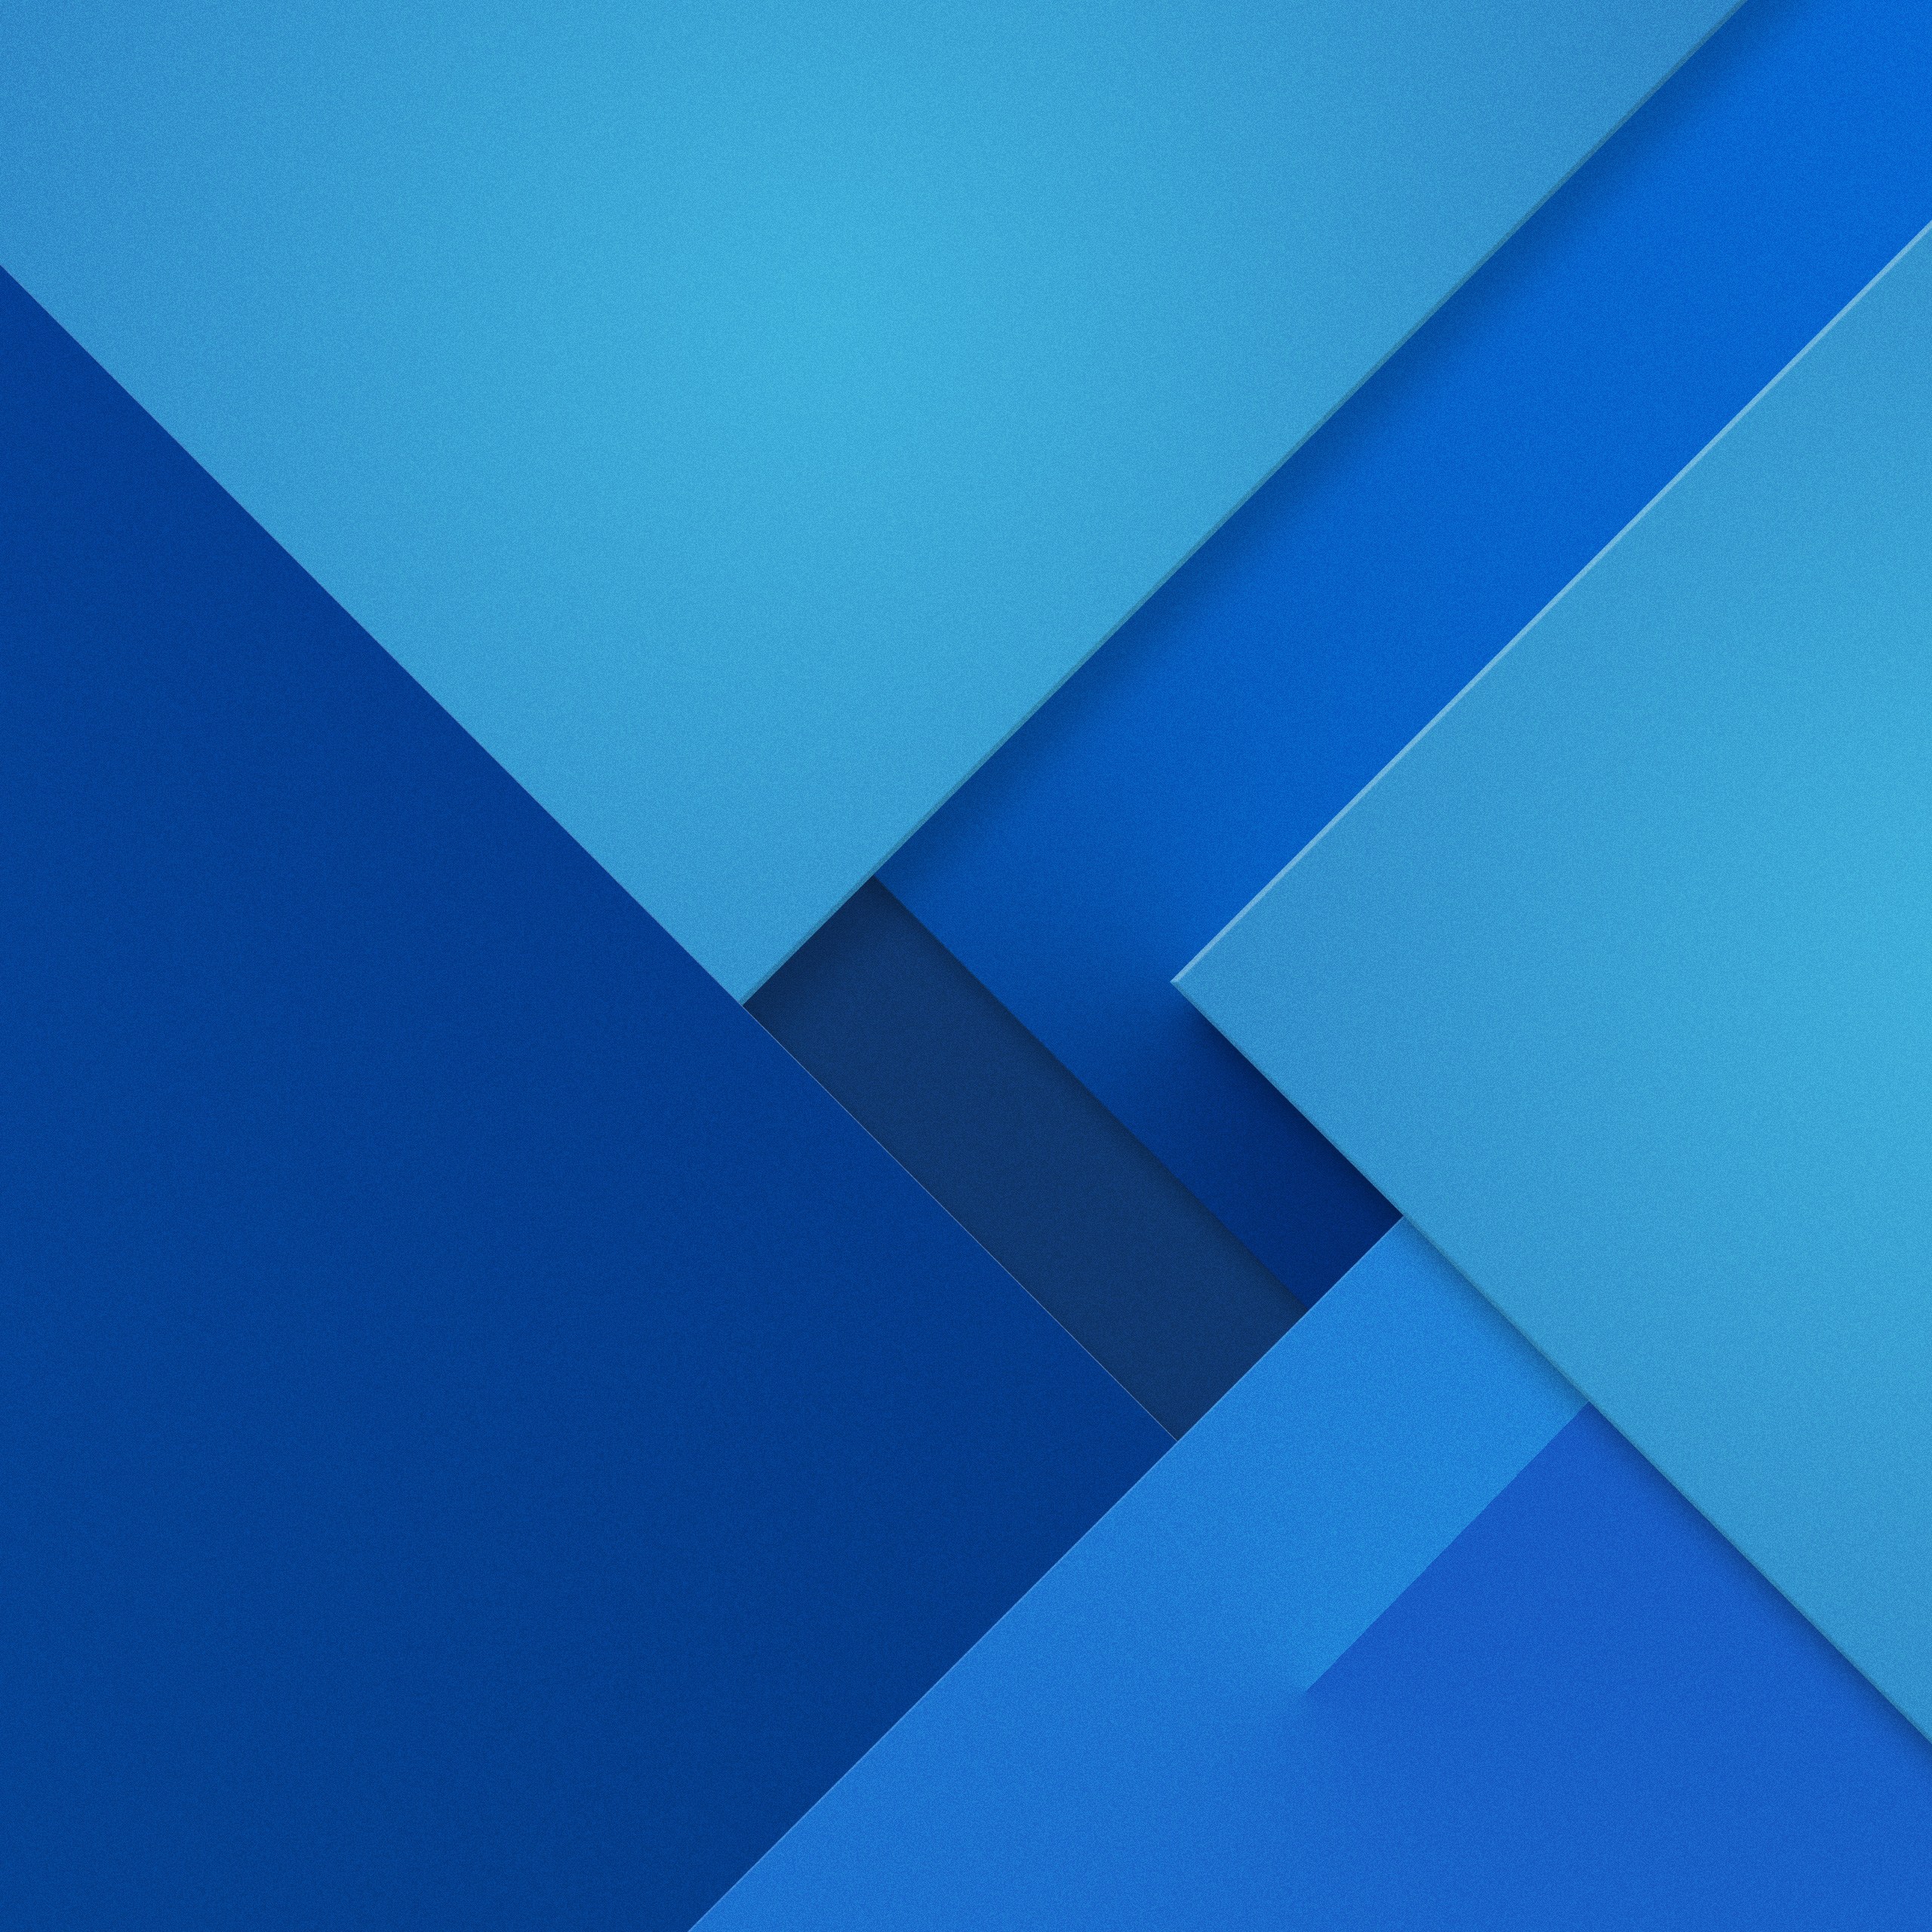 Blue Shapes Phone Background - HD Wallpaper 